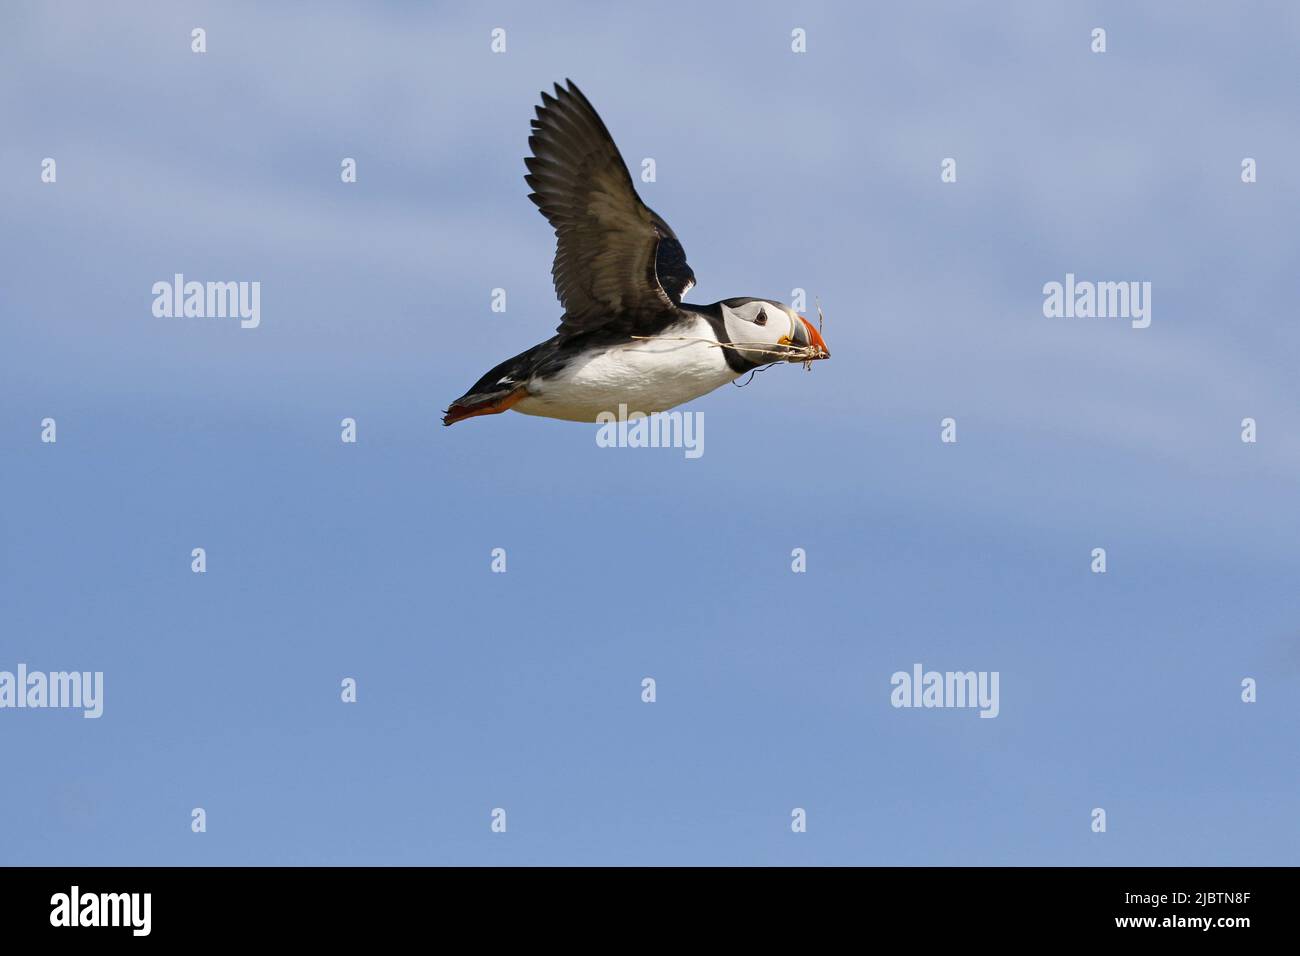 Puffin in flight carrying nesting material Stock Photo